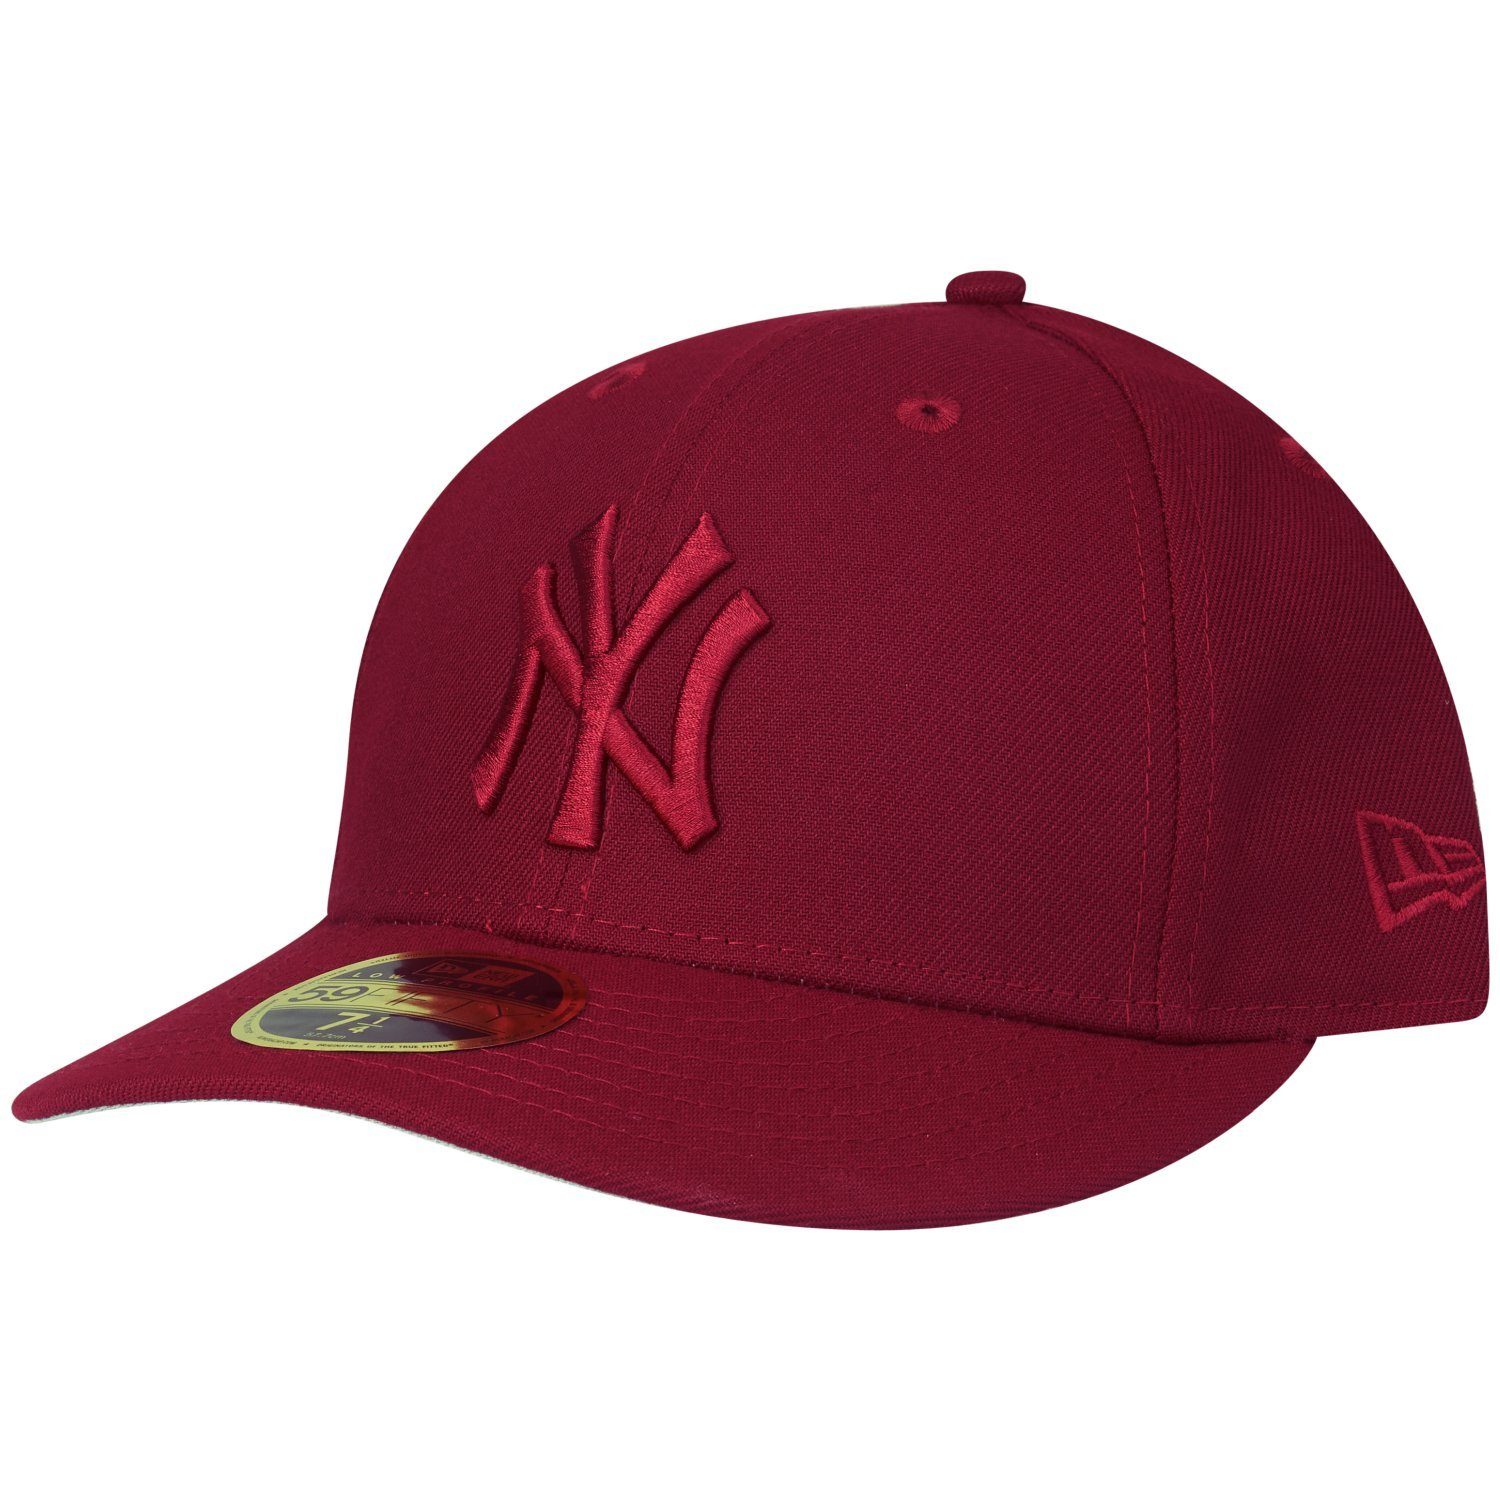 New Cap Low Yankees New Rot Profile Fitted 59Fifty Era York